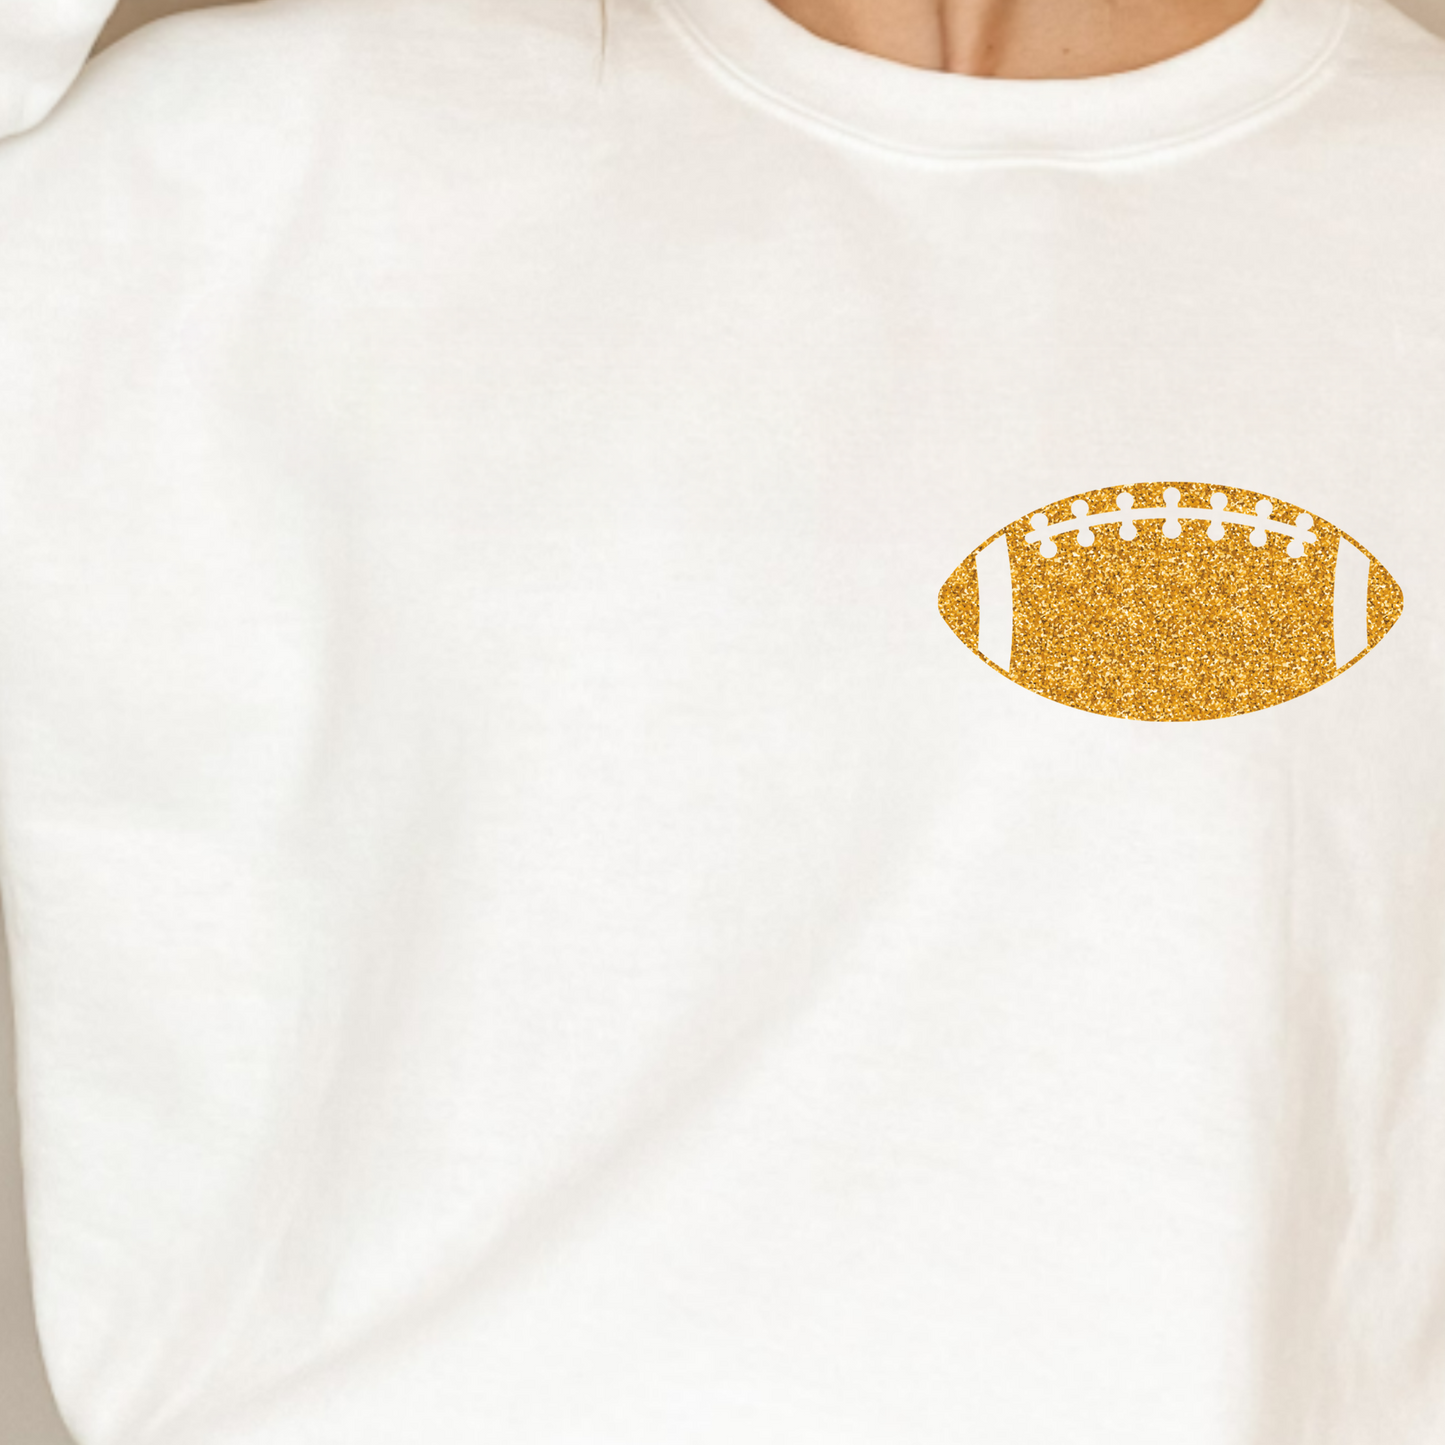 (Shirt not included) GOLD football POCKET - Clear Film Transfer